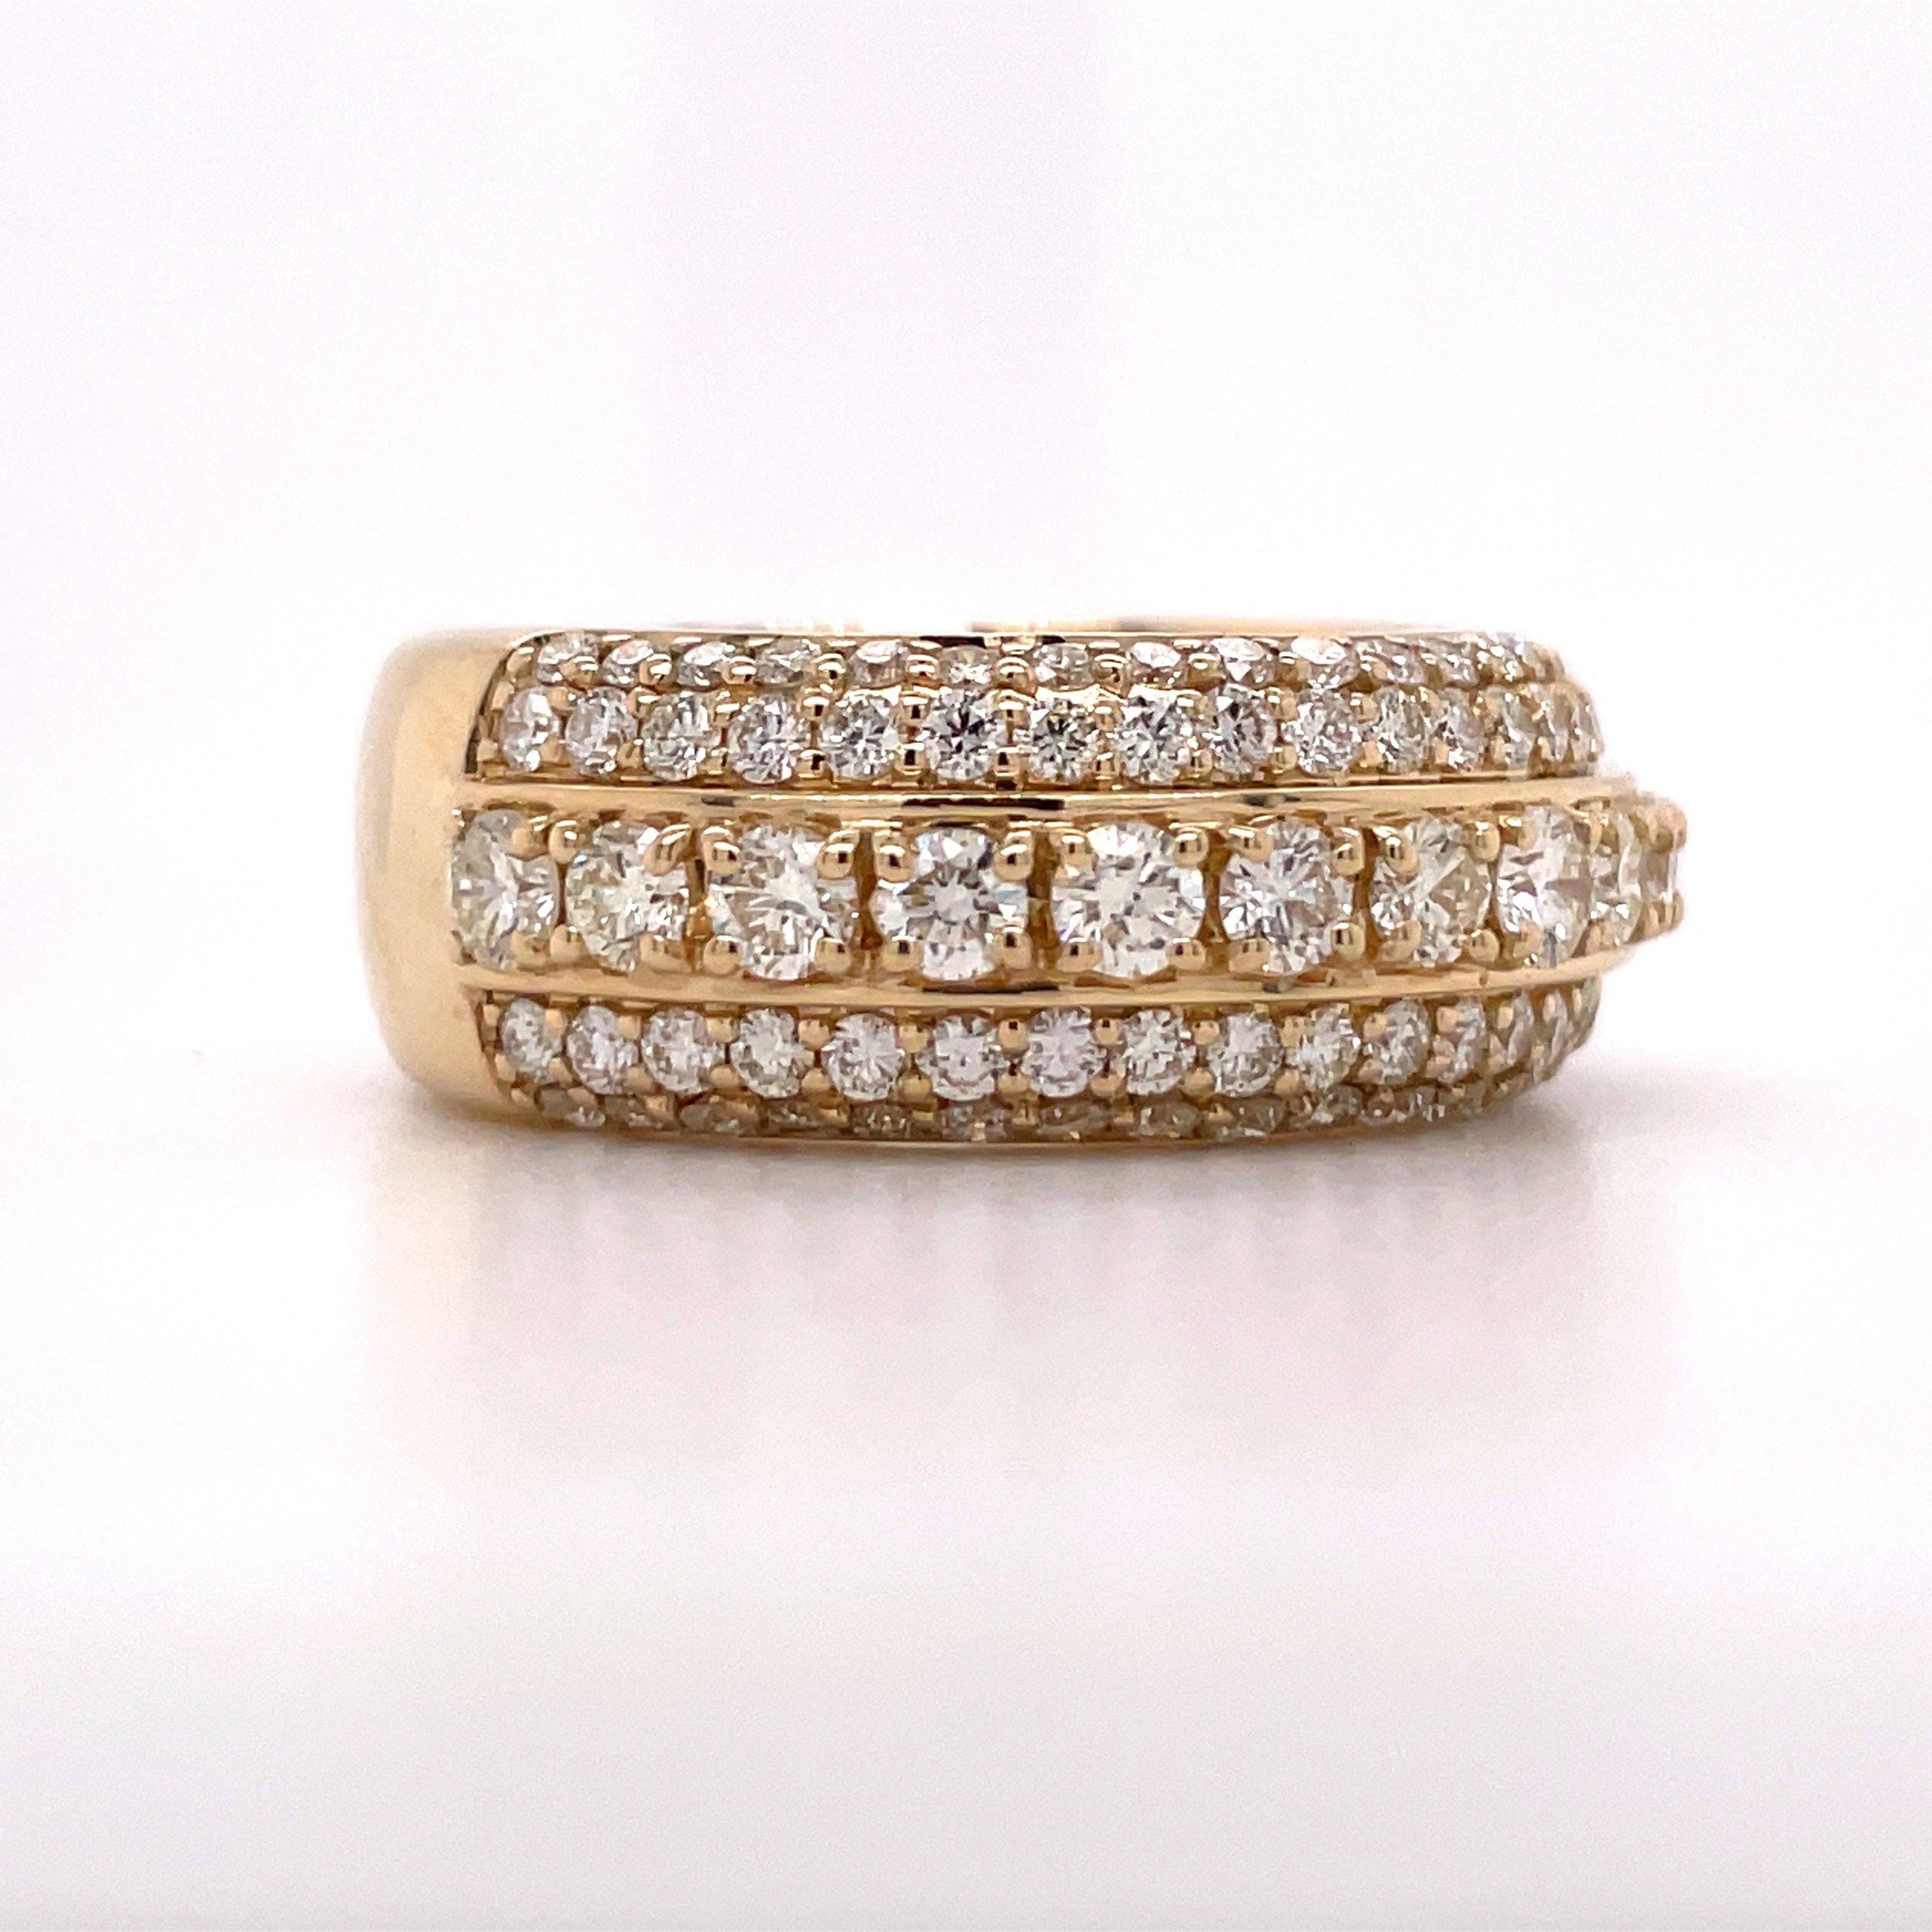 2.75 CT. Diamond Ring in 14KT Gold - White Carat - USA & Canada